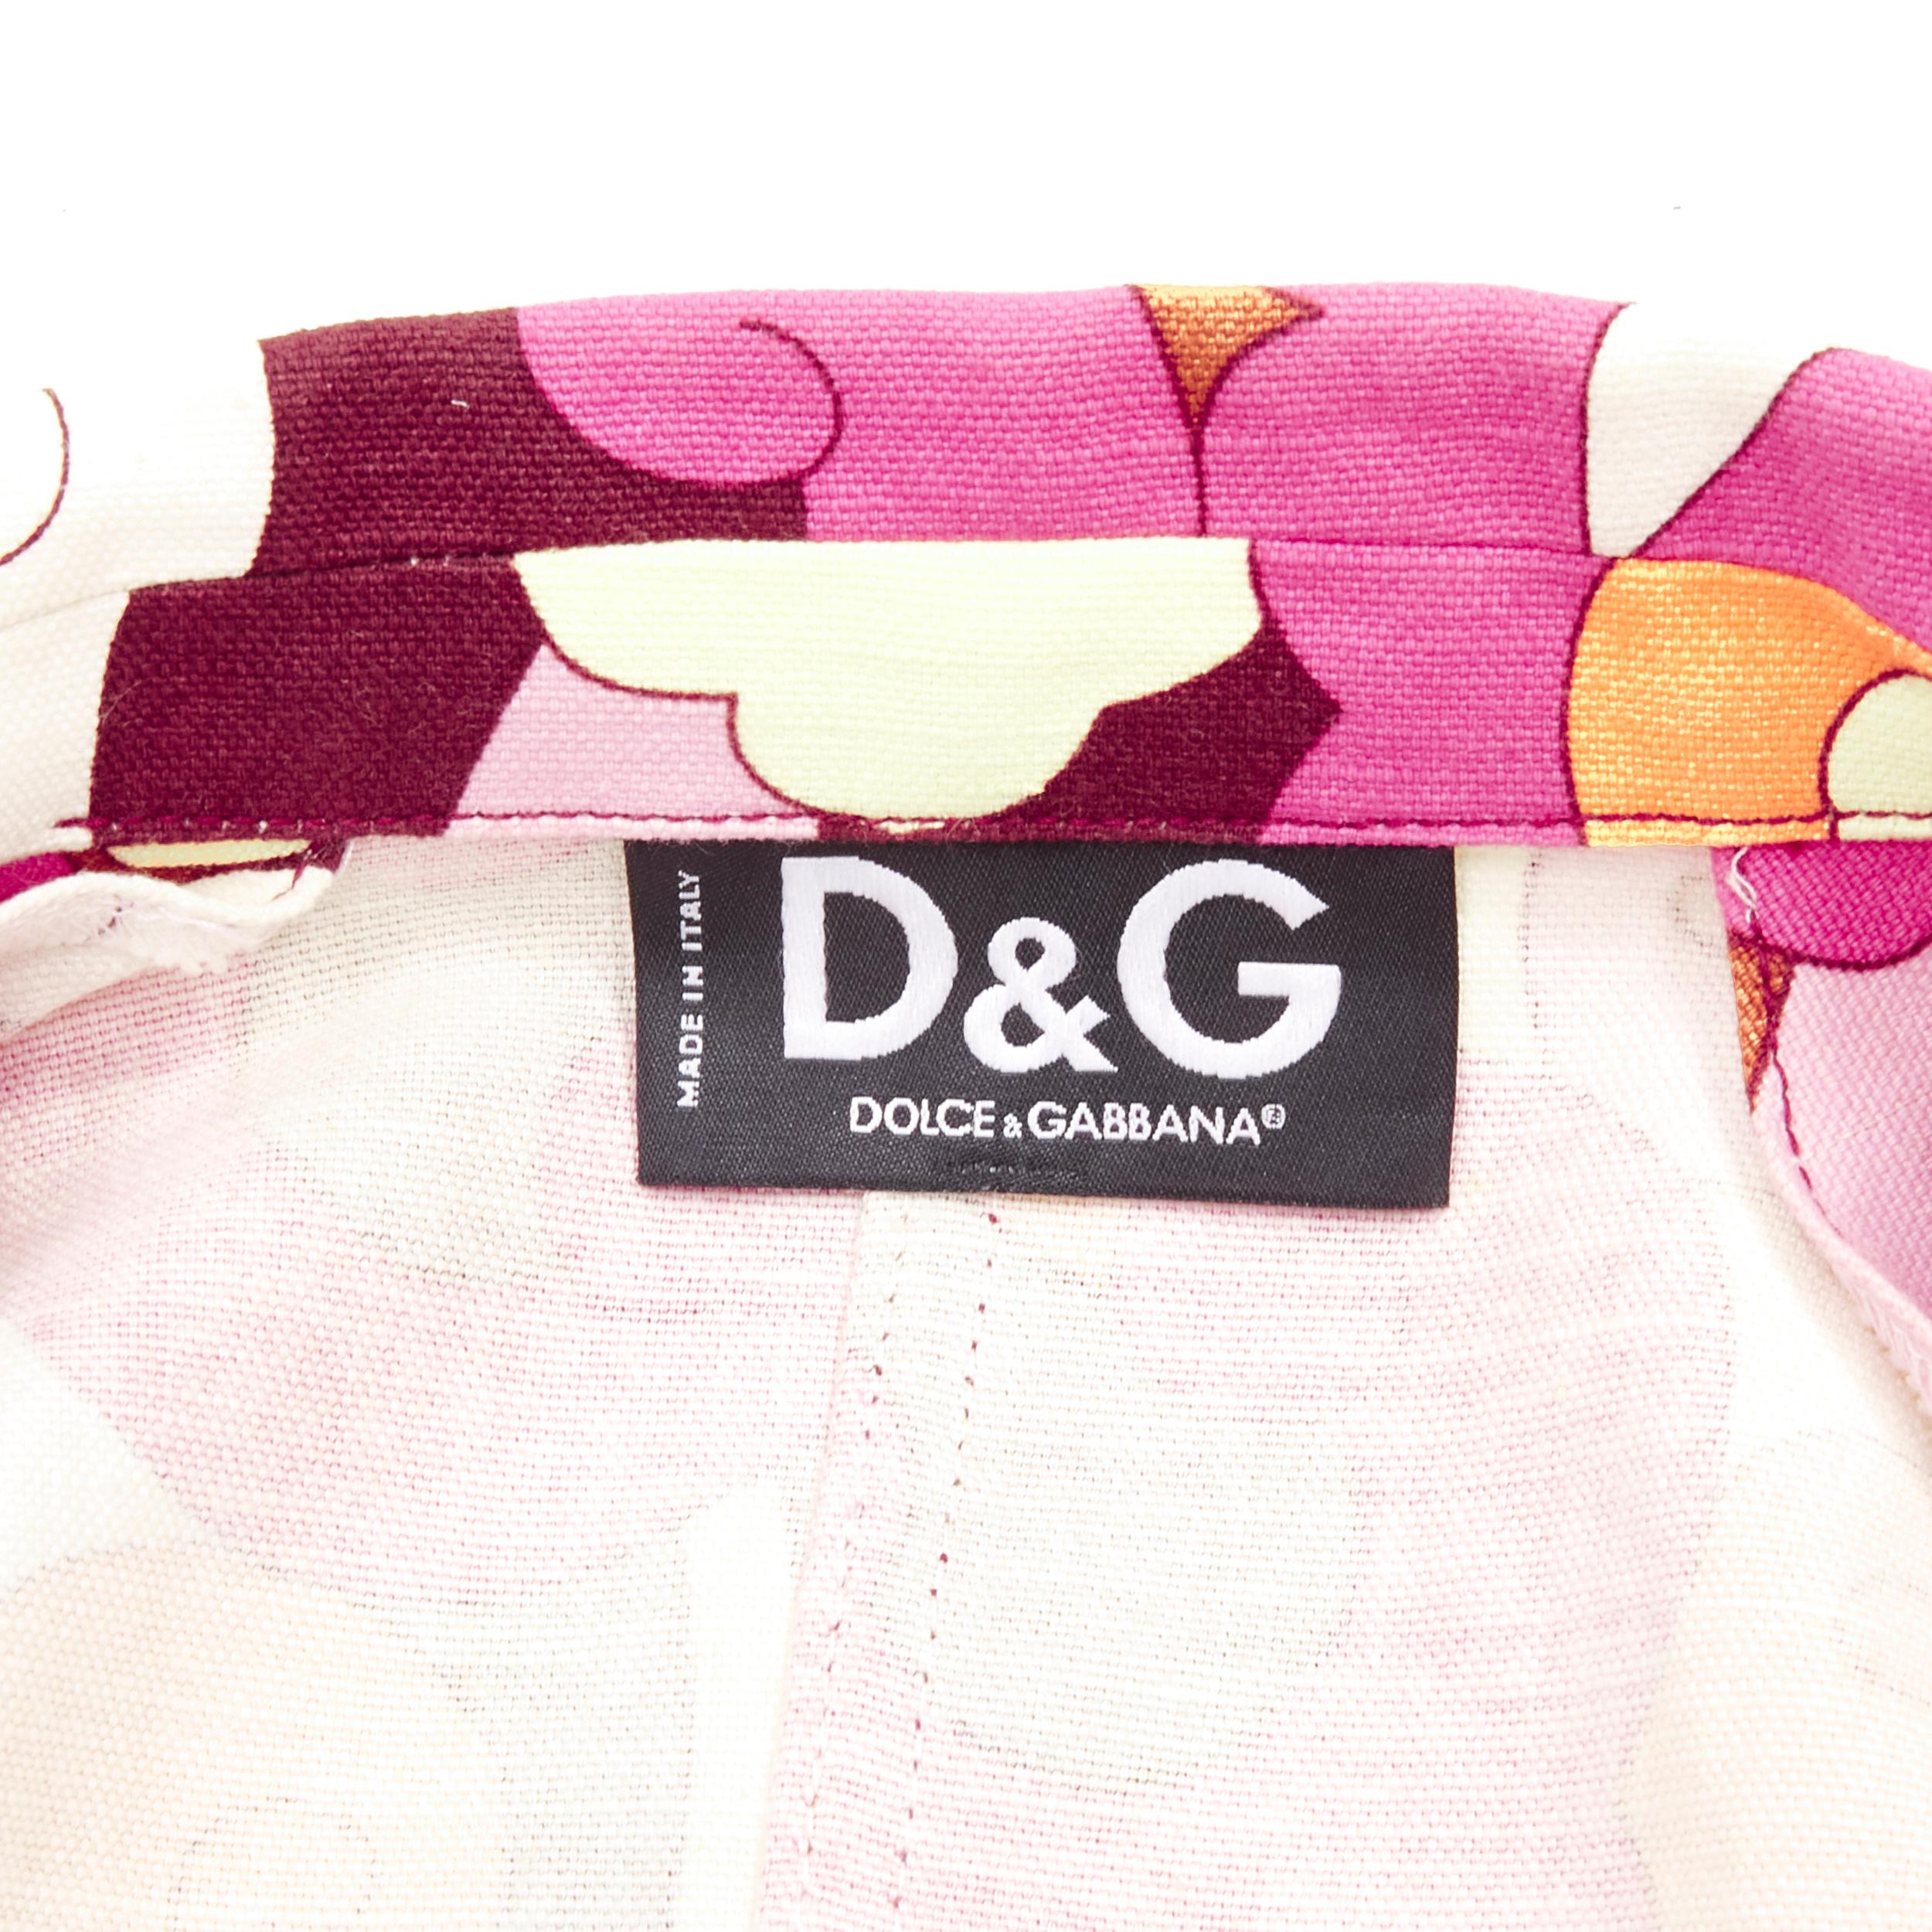 D&G DOLCE GABBANA Vintage Flower Power psychedelic print casual blazer jacket XS For Sale 5